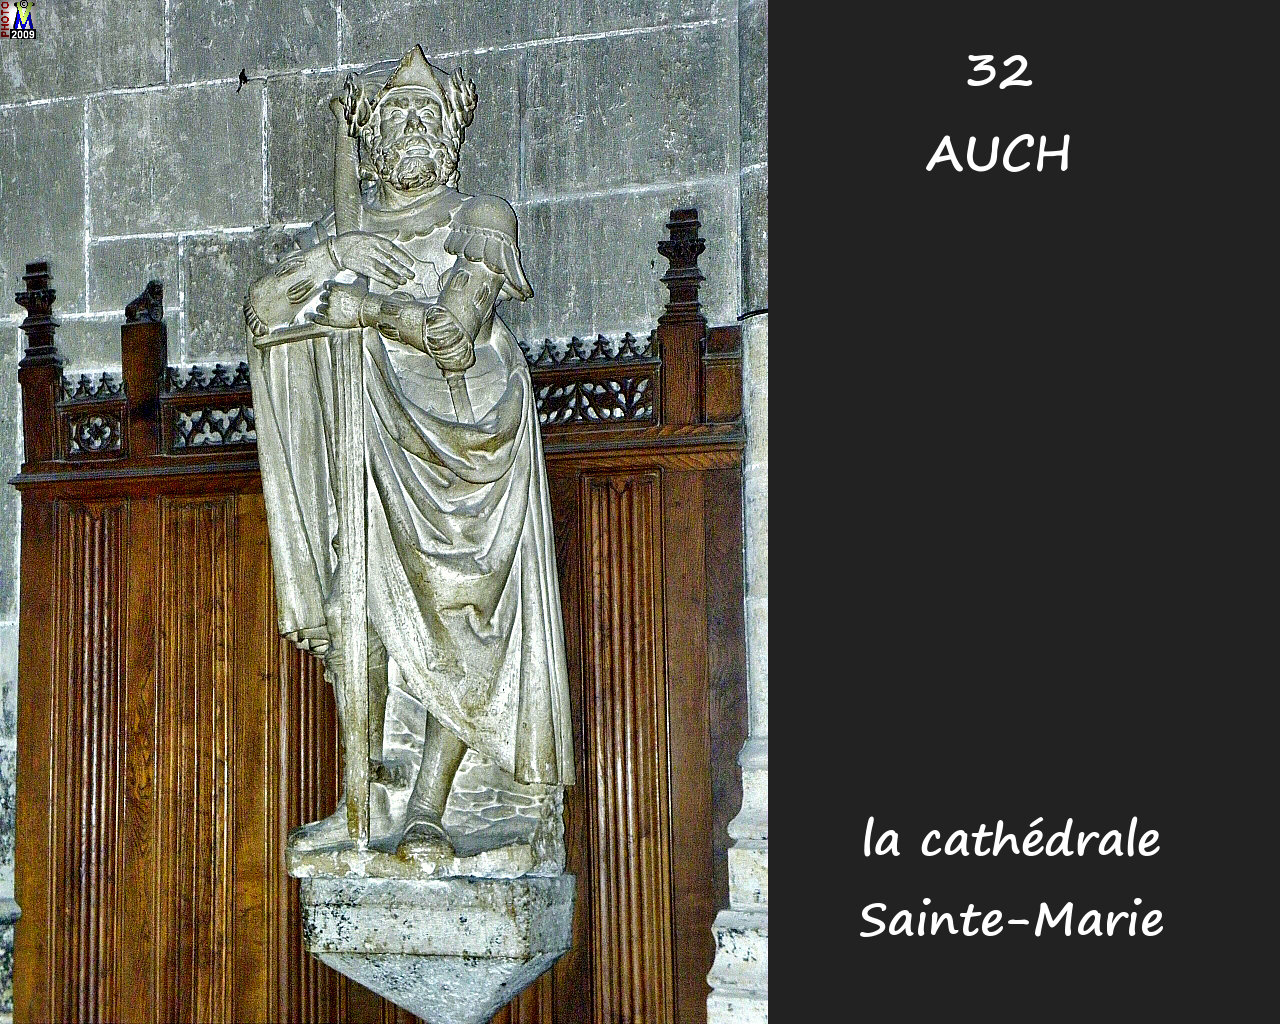 32AUCH_cathedrale_248.jpg